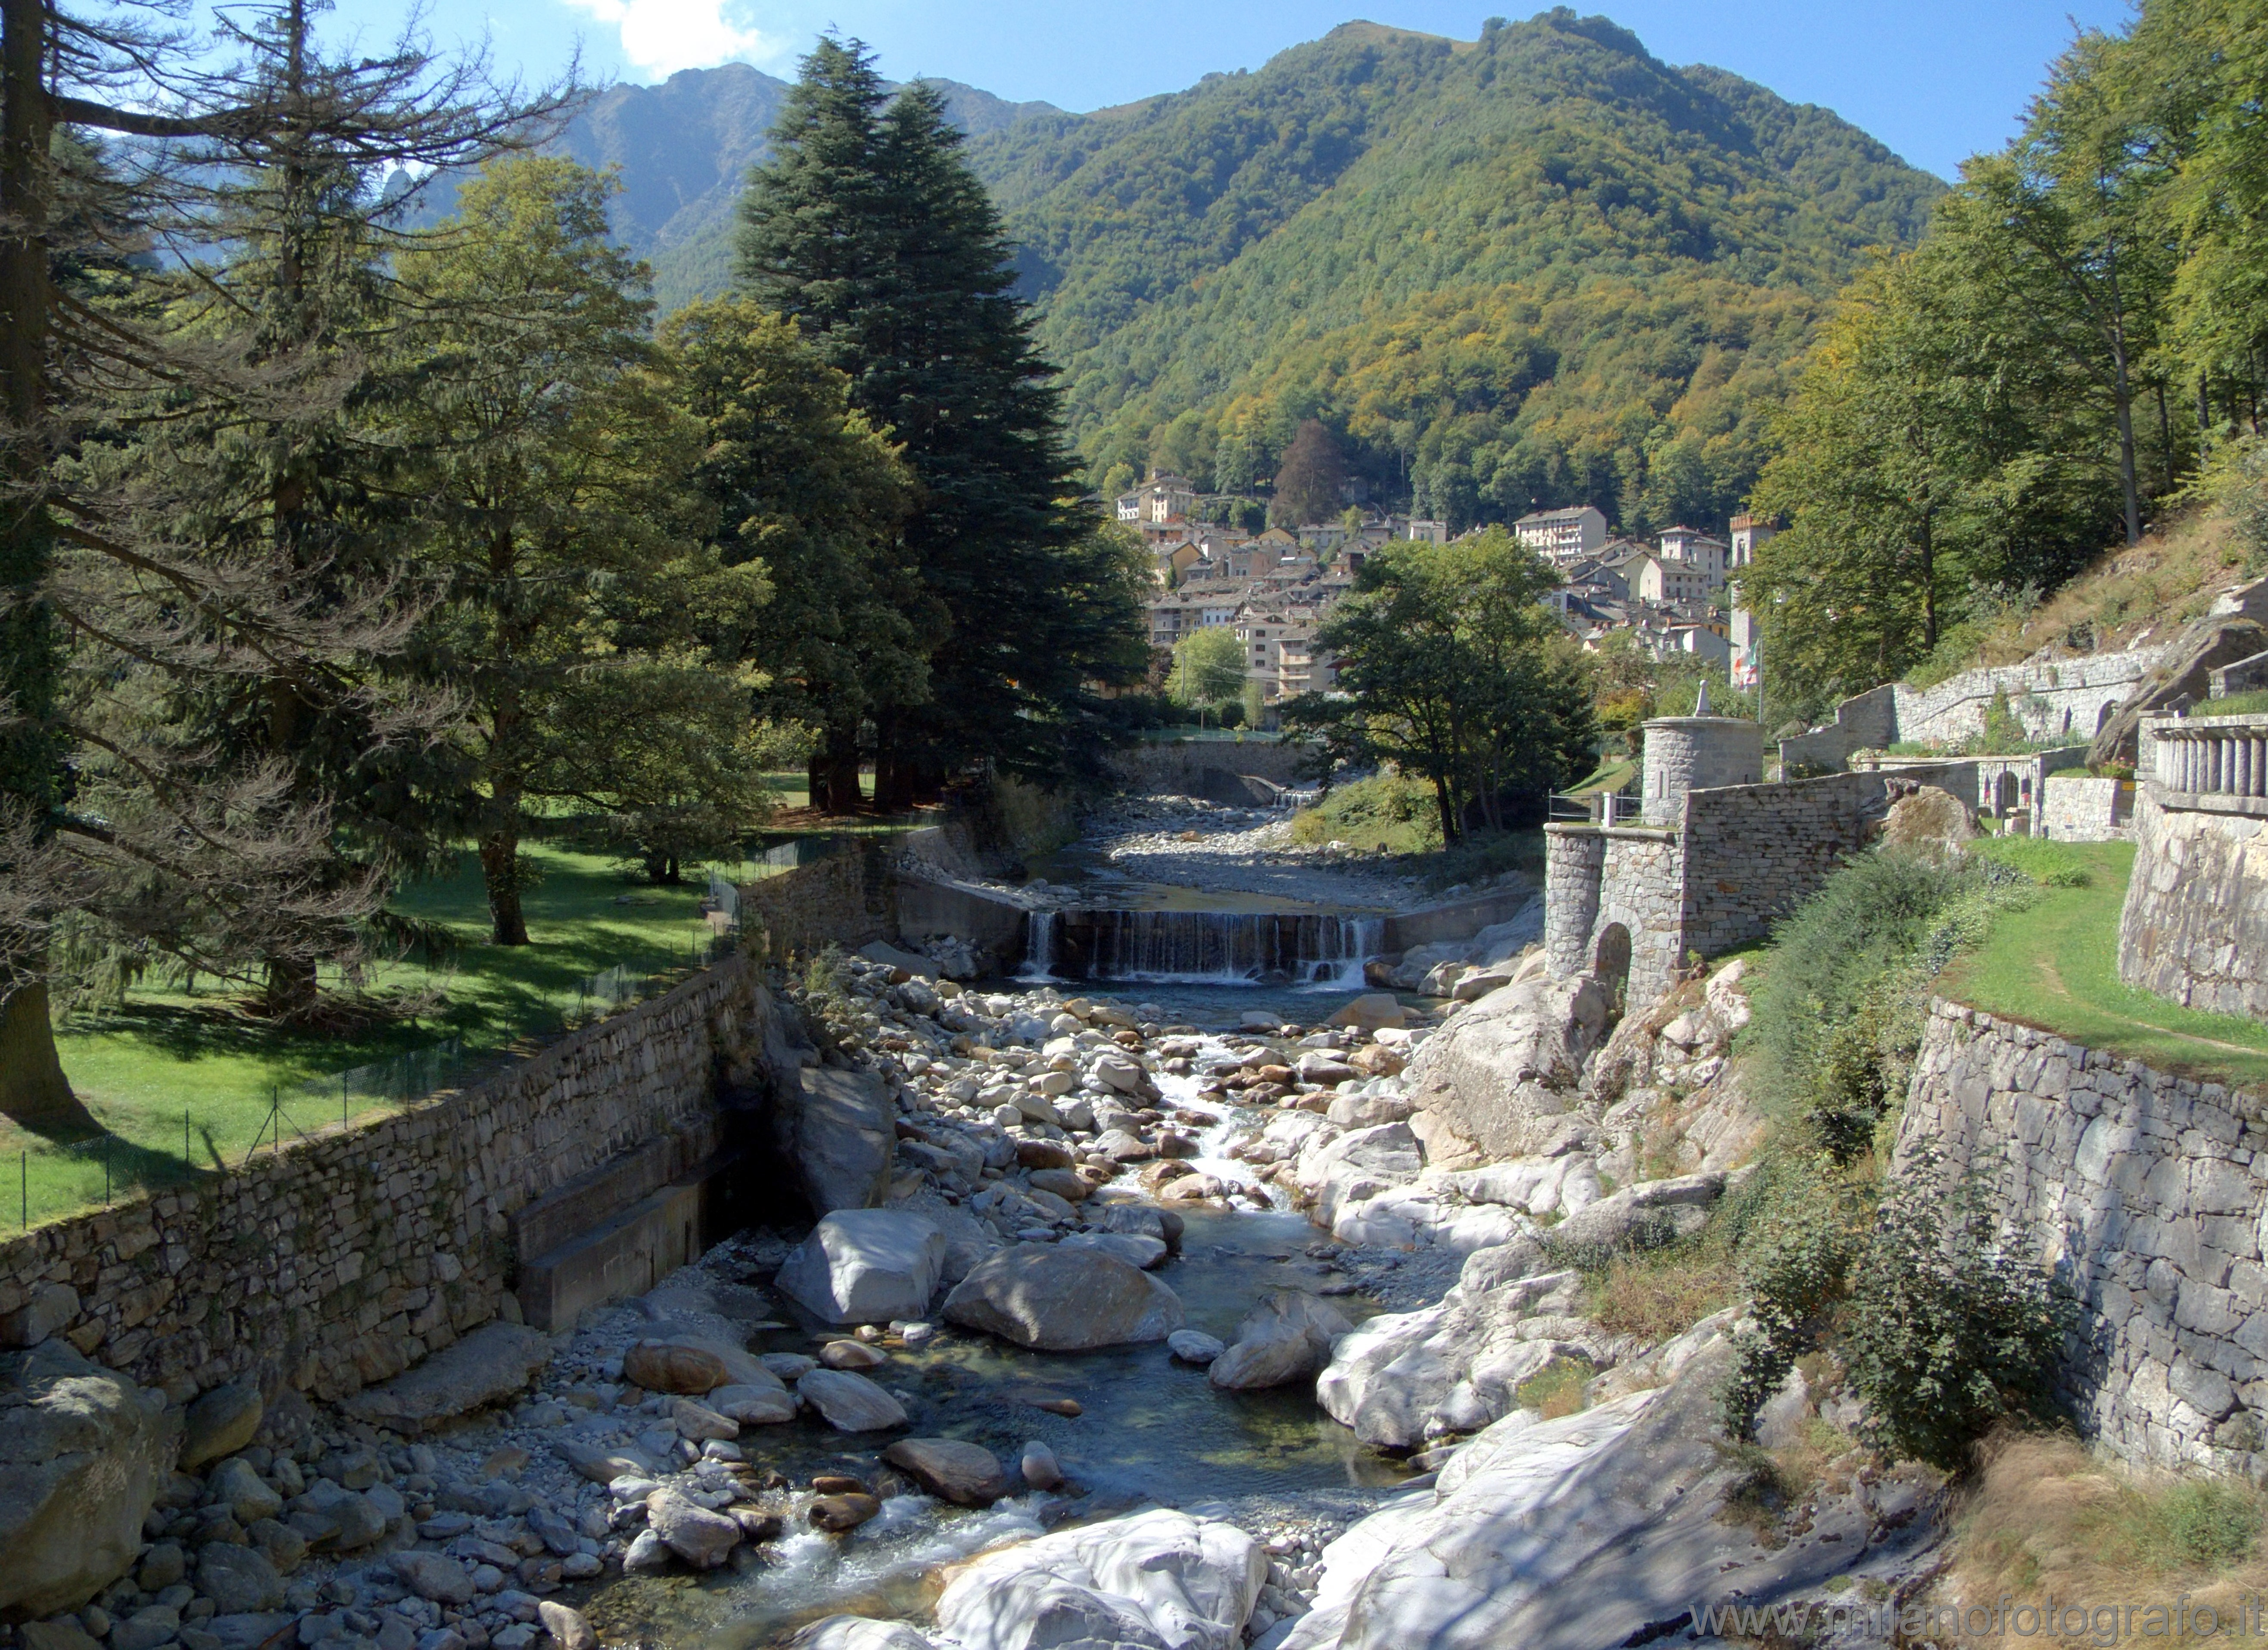 Rosazza (Biella, Italy): The town seen from the cemetery bridge - Rosazza (Biella, Italy)